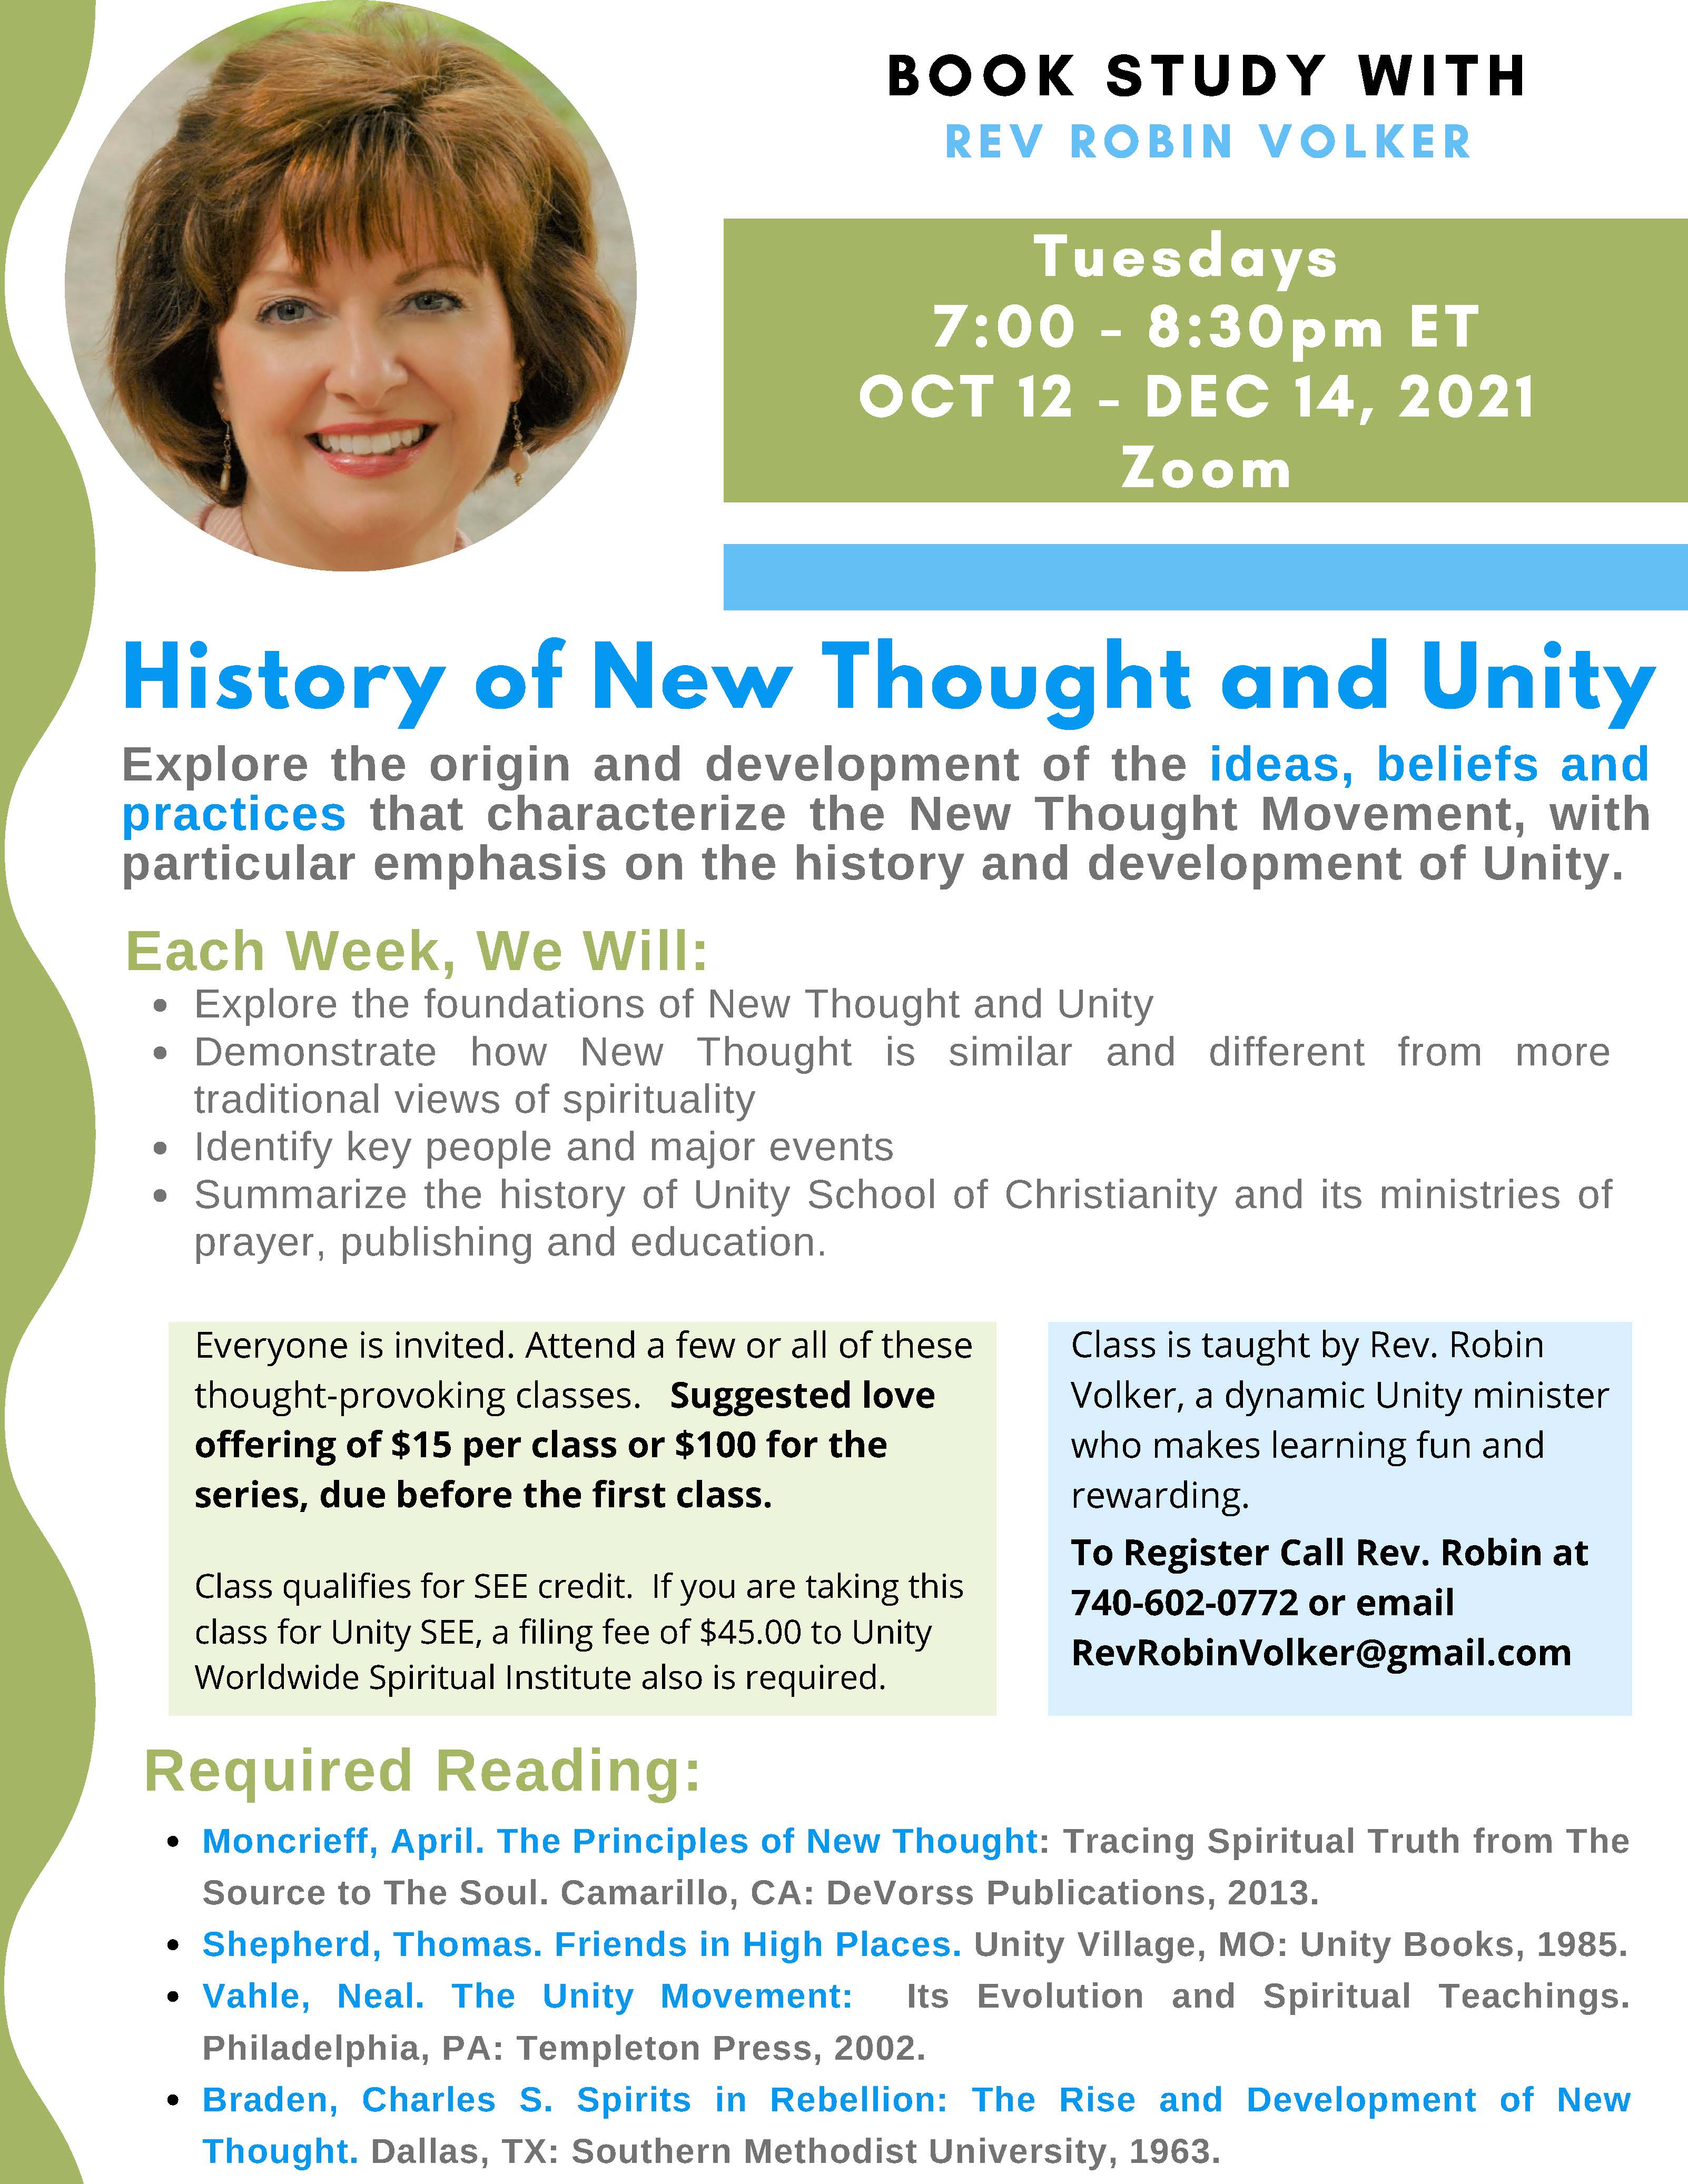 History of New Thought Class 10122021